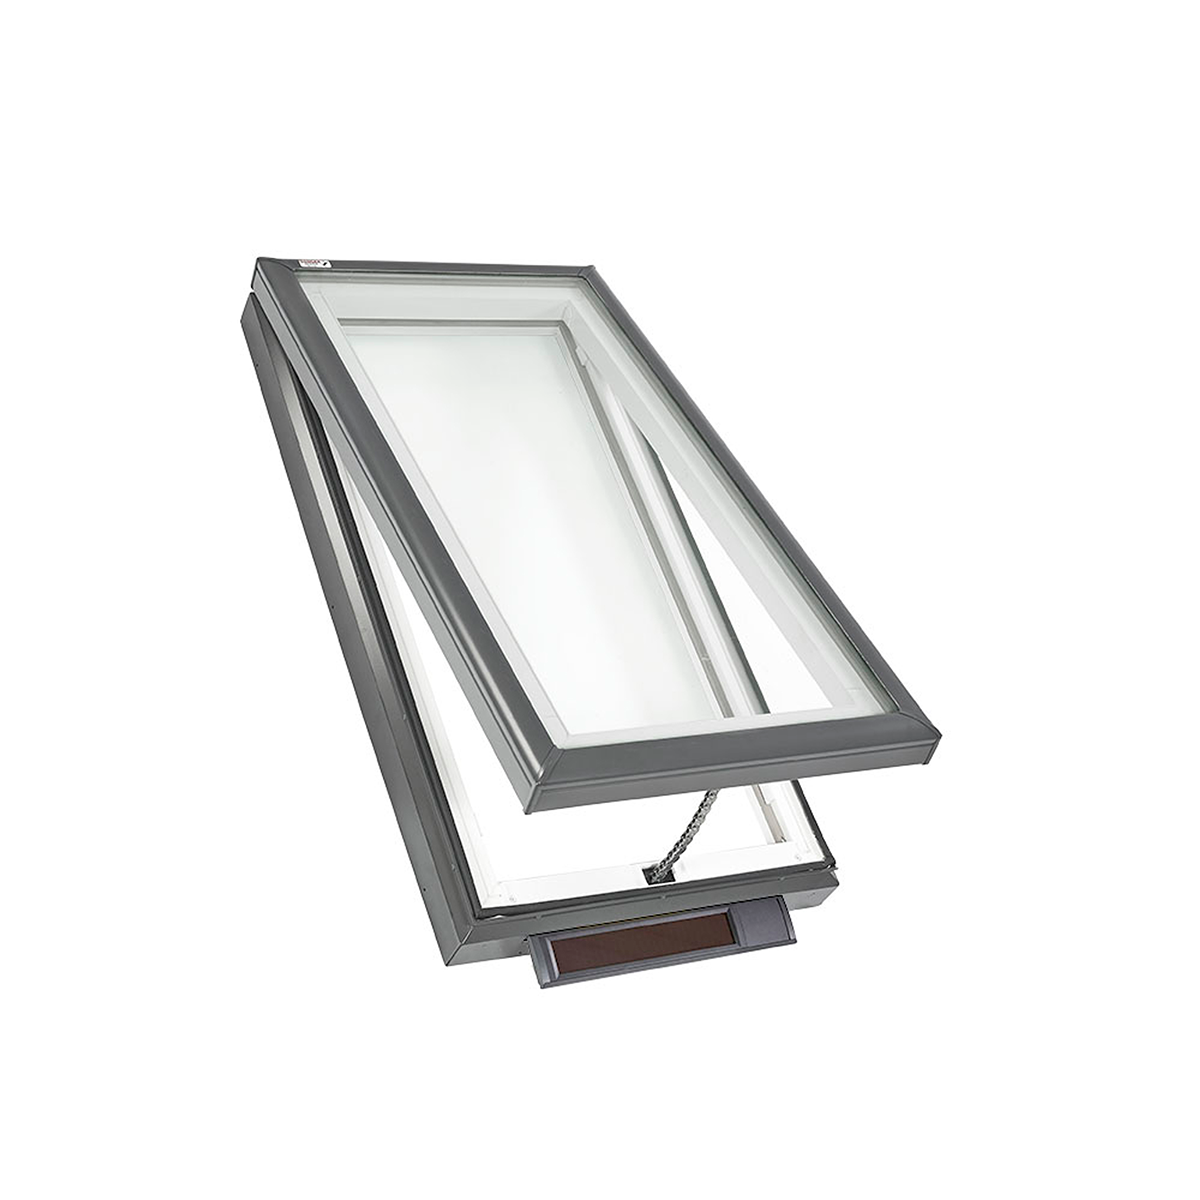 Solar Powered Curb-Mount Skylight with Laminated Low-E3 Glass - 22-1/2 in. x 46-1/2 in. - VCS 2246